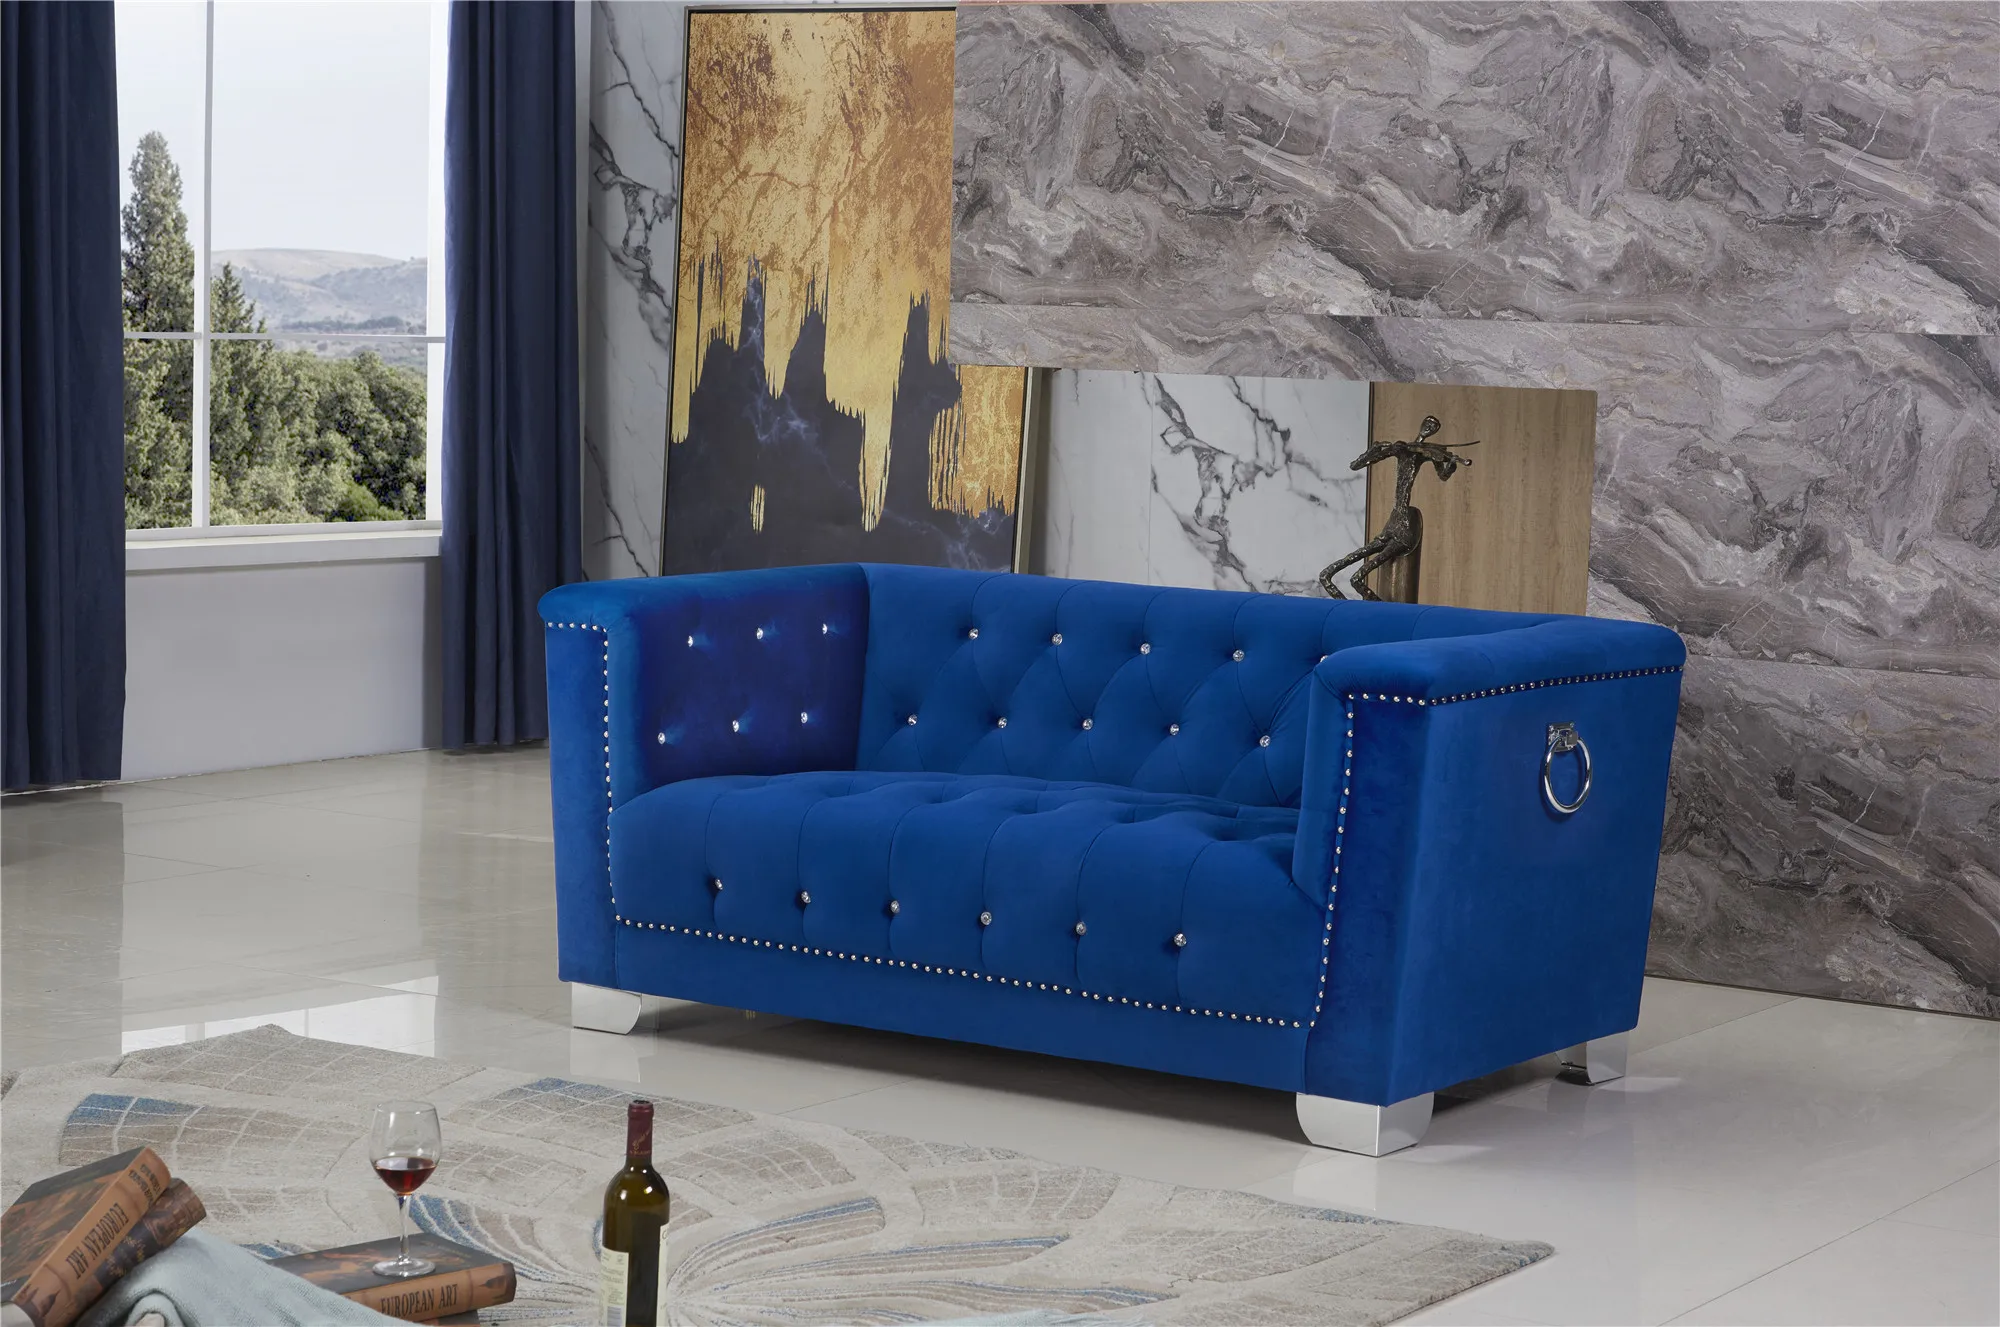 Living room sofas newest chesterfield sofa vintage couch with blue velvet fabric